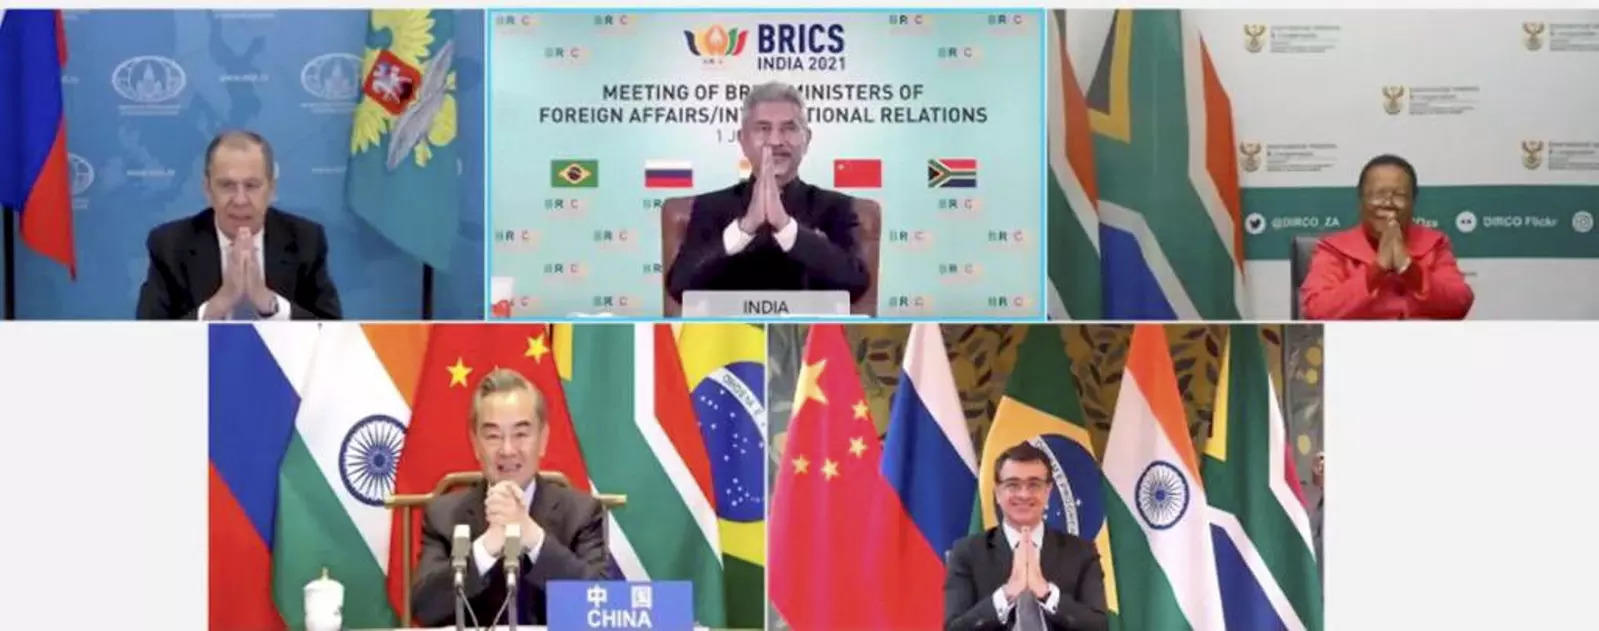 India to hold two-day BRICS meet on Green Hydrogen initiatives